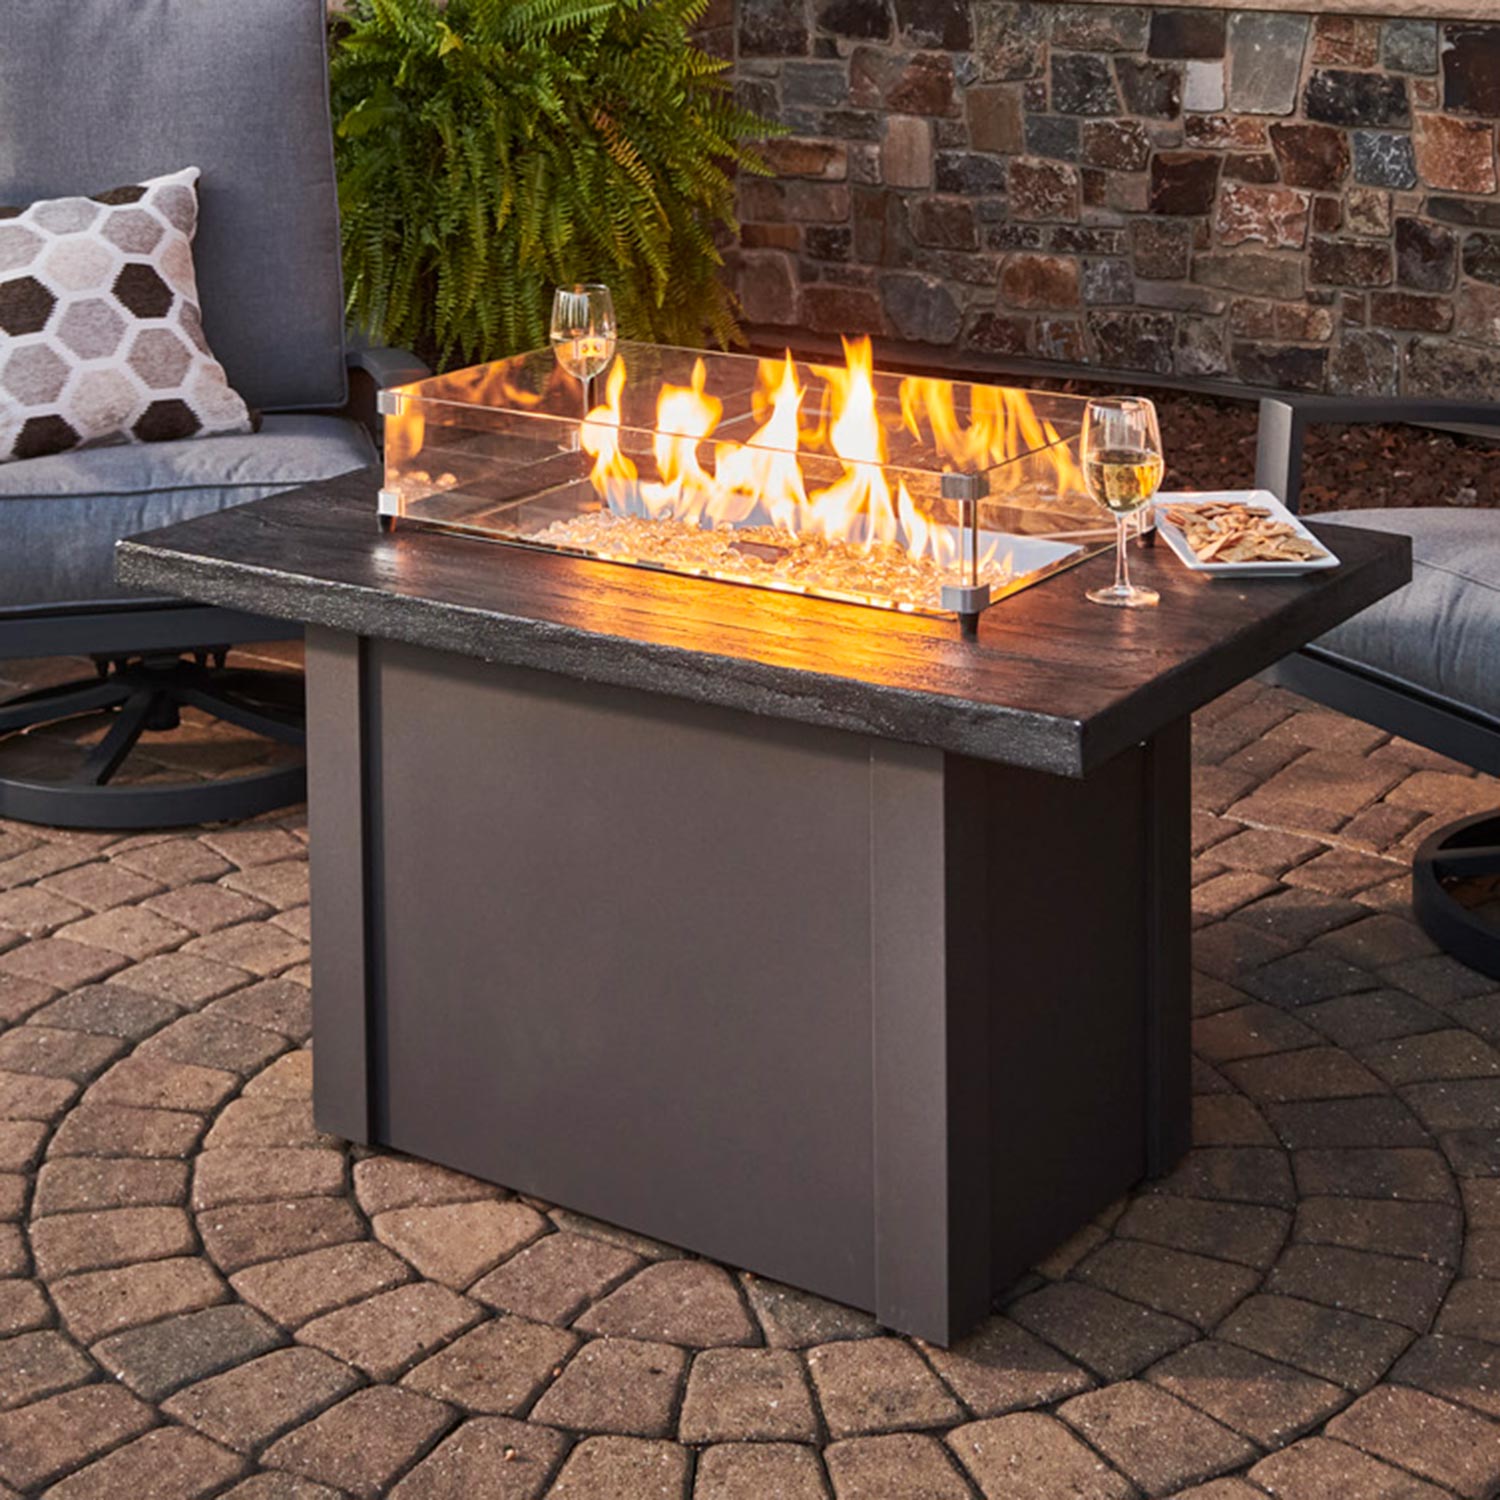 Havenwood Rectangular Gas Fire Pit Table w/ Glass Guard